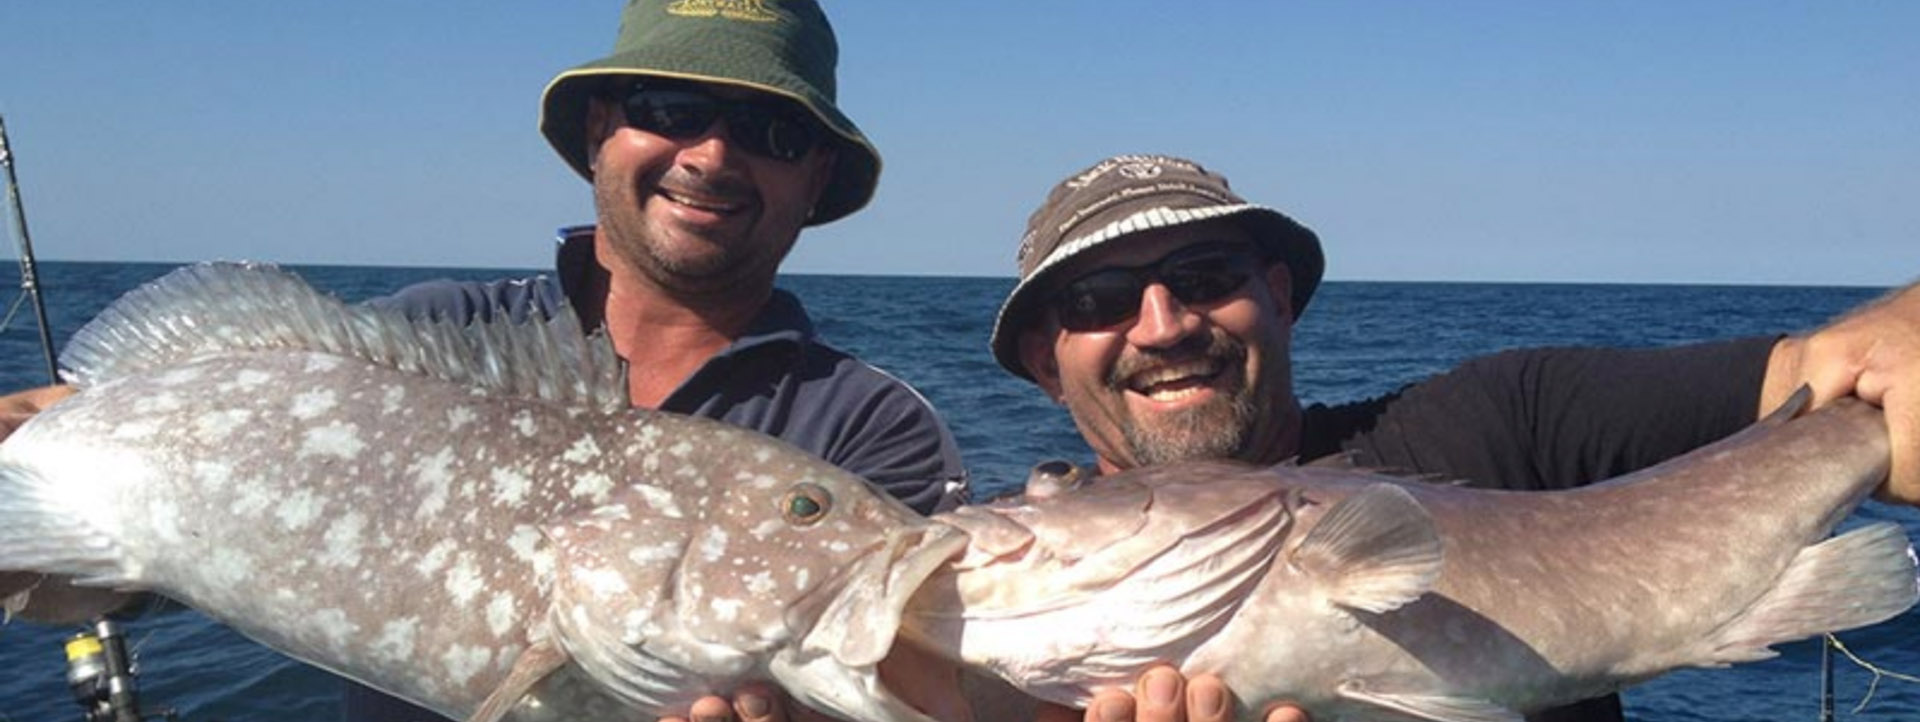 BROOME FISHING charters full day tours